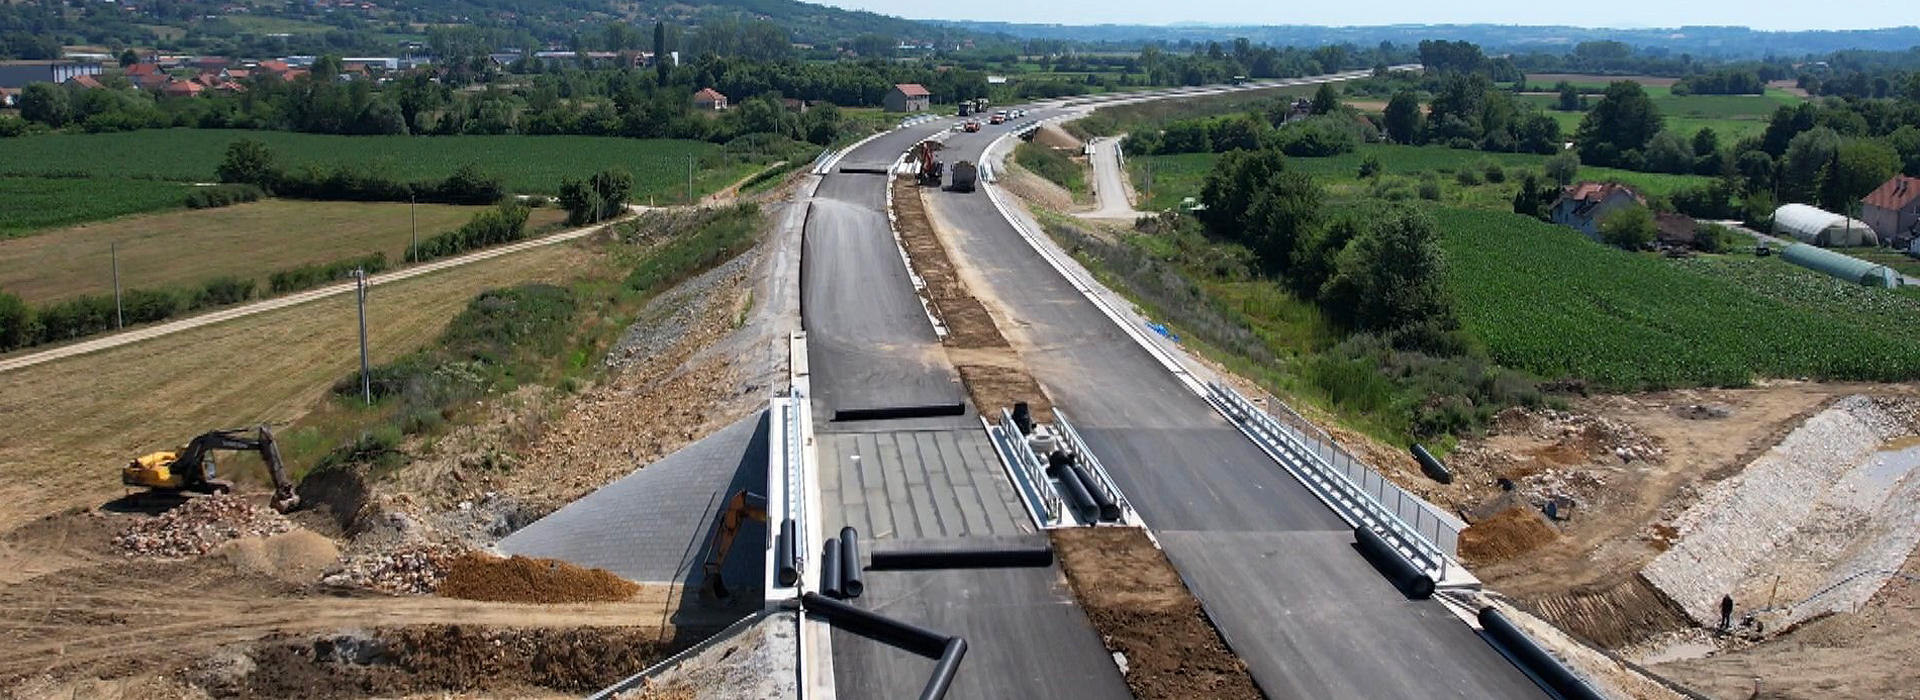 NEW VIDEO OF THE CONSTRUCTION OF  IVERAK LAJKOVAC EXPRESSWAY